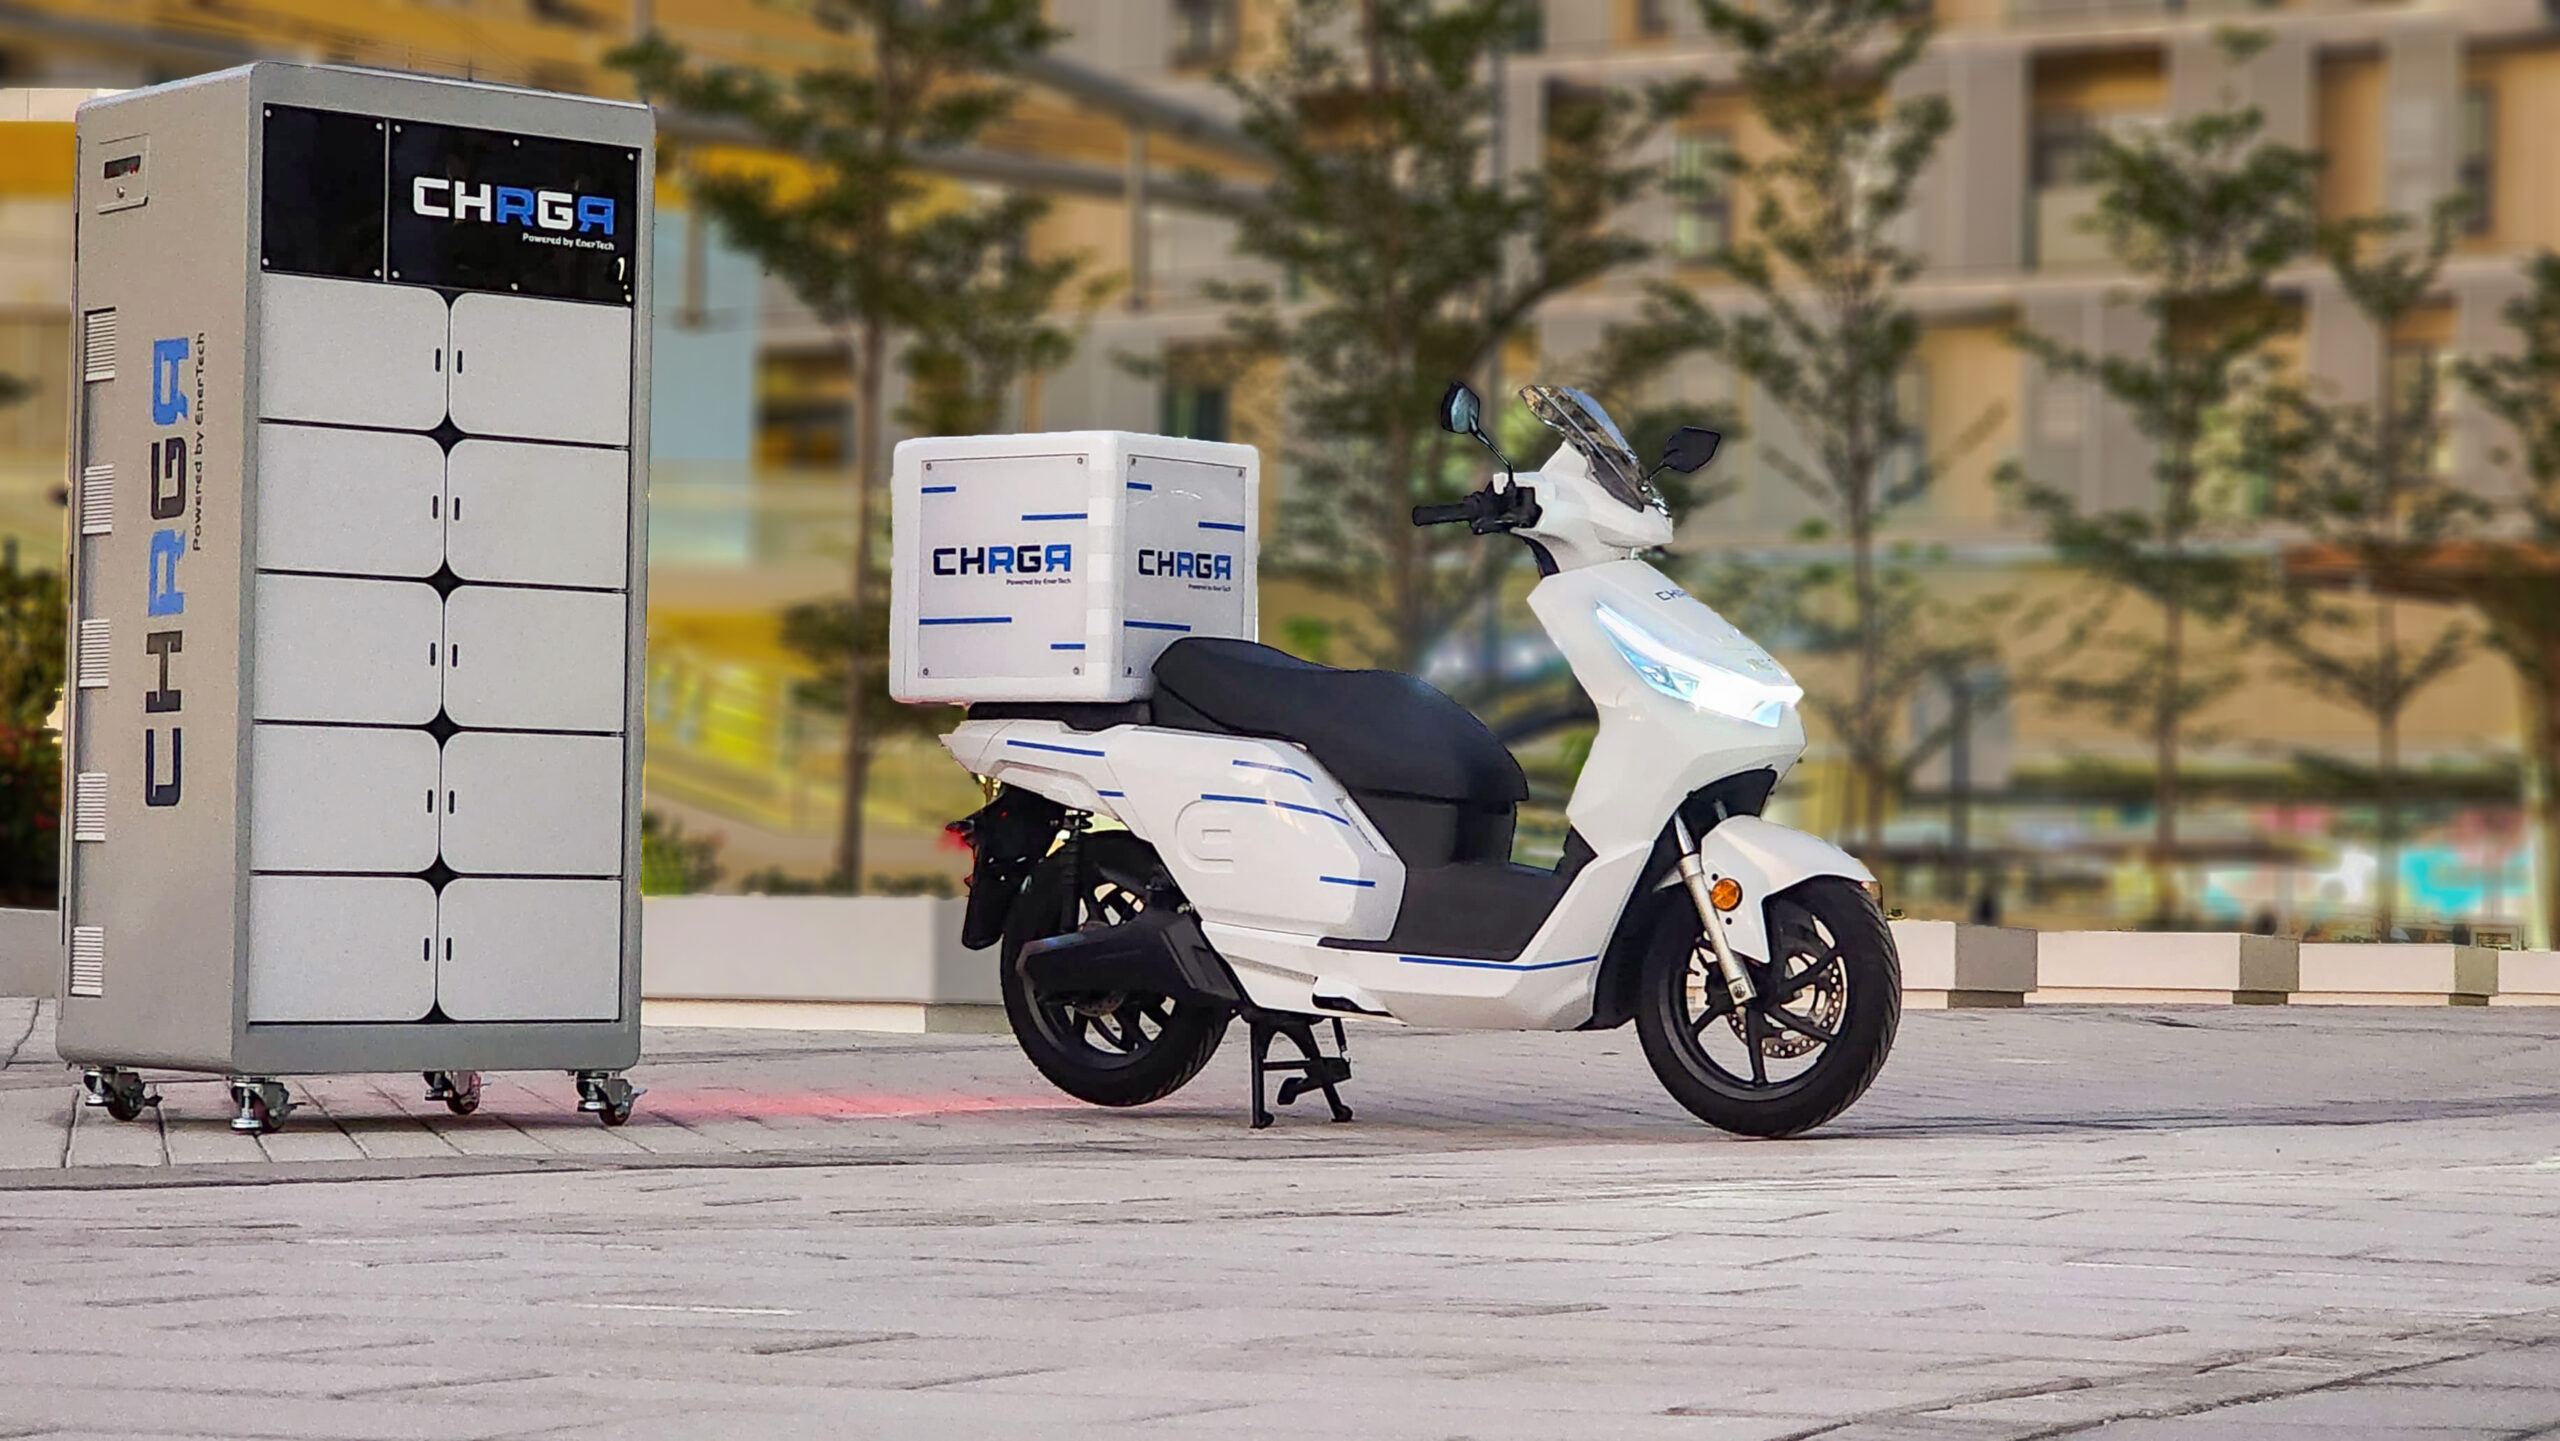 Image for Kuwait’s EnerTech Debuts Innovative End-to-End Electric Mobility Platform ‘CHRGR’ in the UAE, Marking New Era for Sustainable Transportation